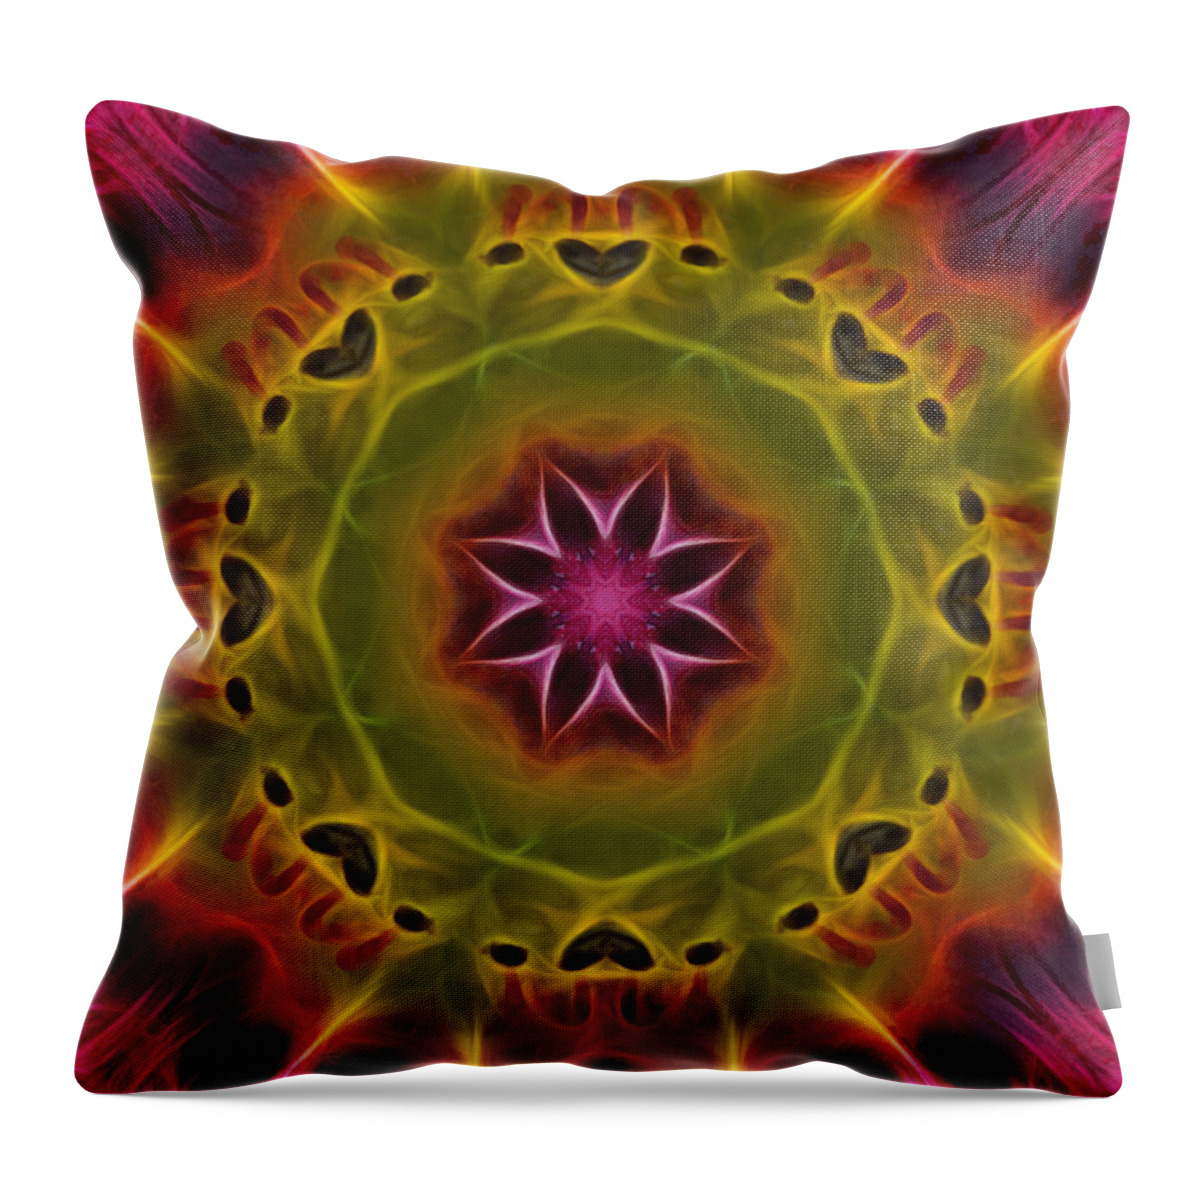 Mandala Throw Pillow featuring the photograph Powerful Creator - Square by Beth Venner